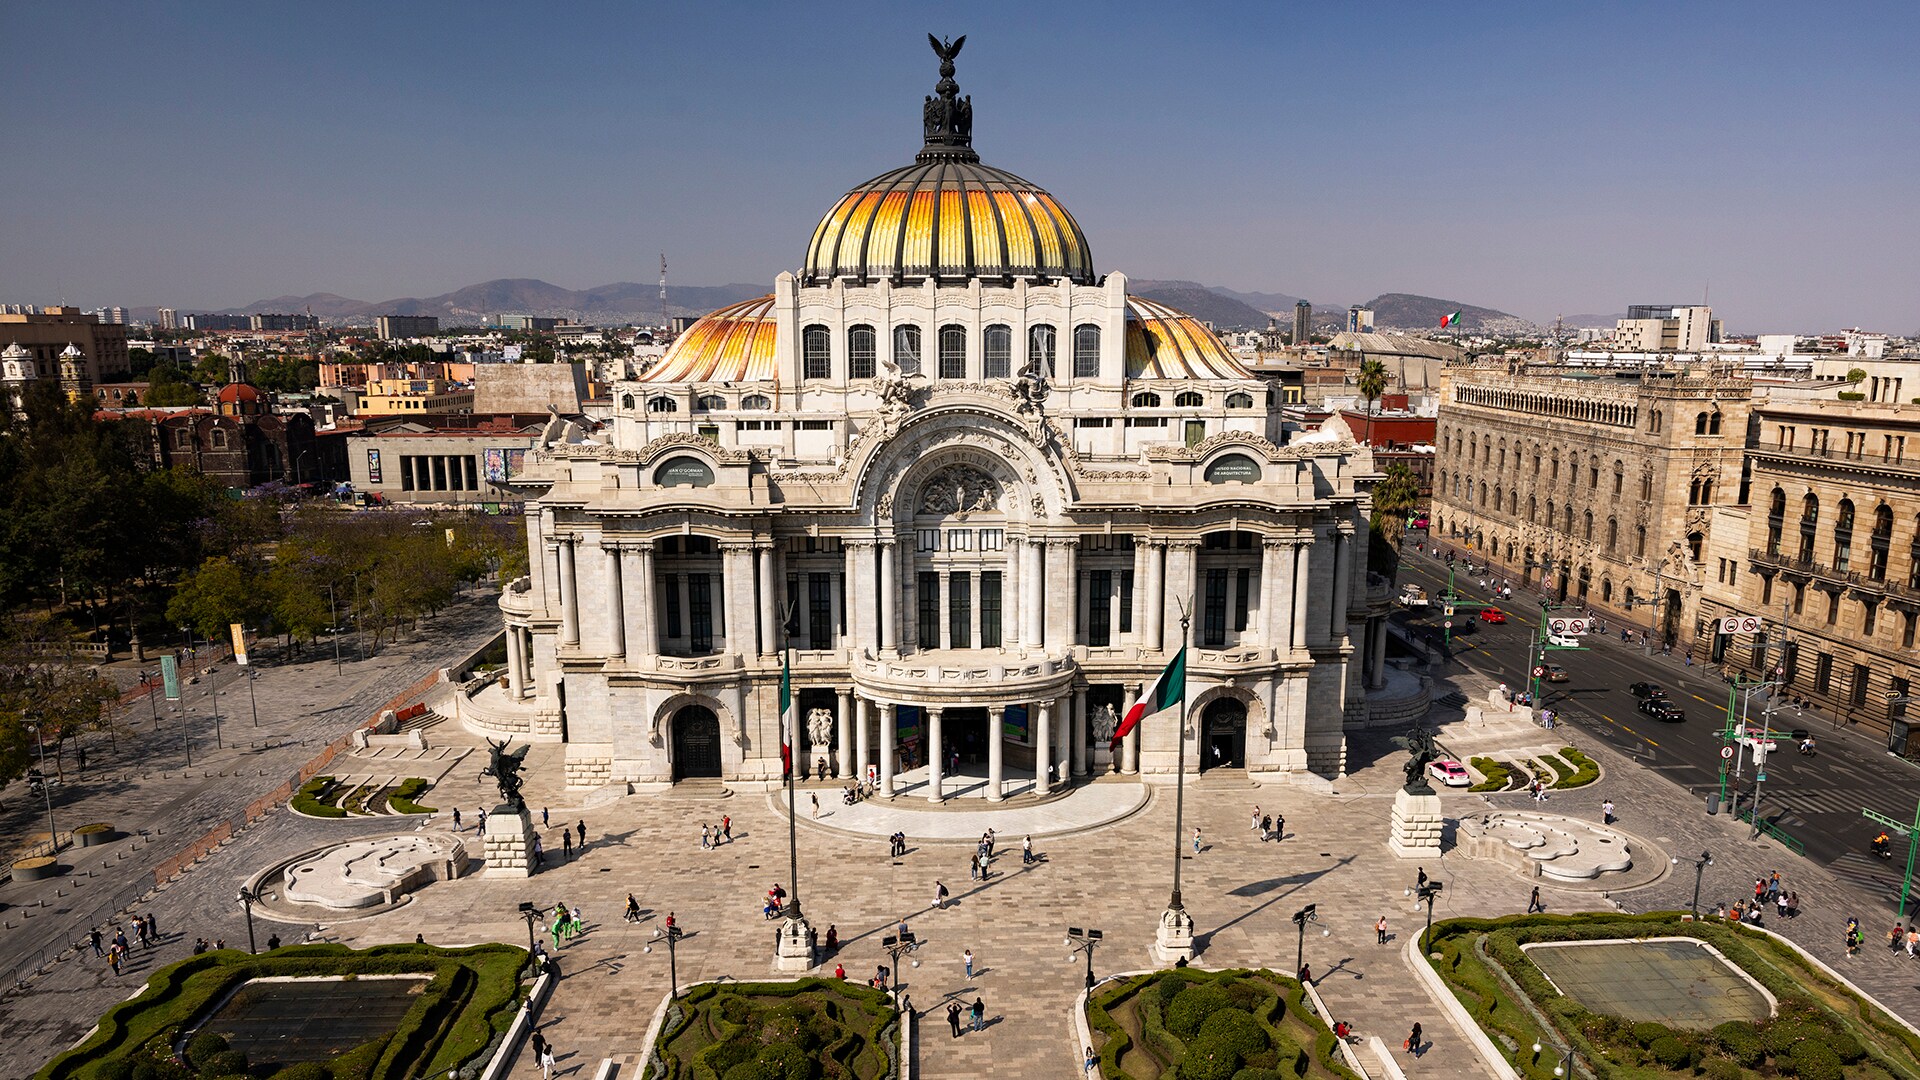 Construction on the Palacio de Bellas Artes, a performance hall and museum, began in 1904, and it now houses works by Diego Rivera and Rufino Tamayo. 